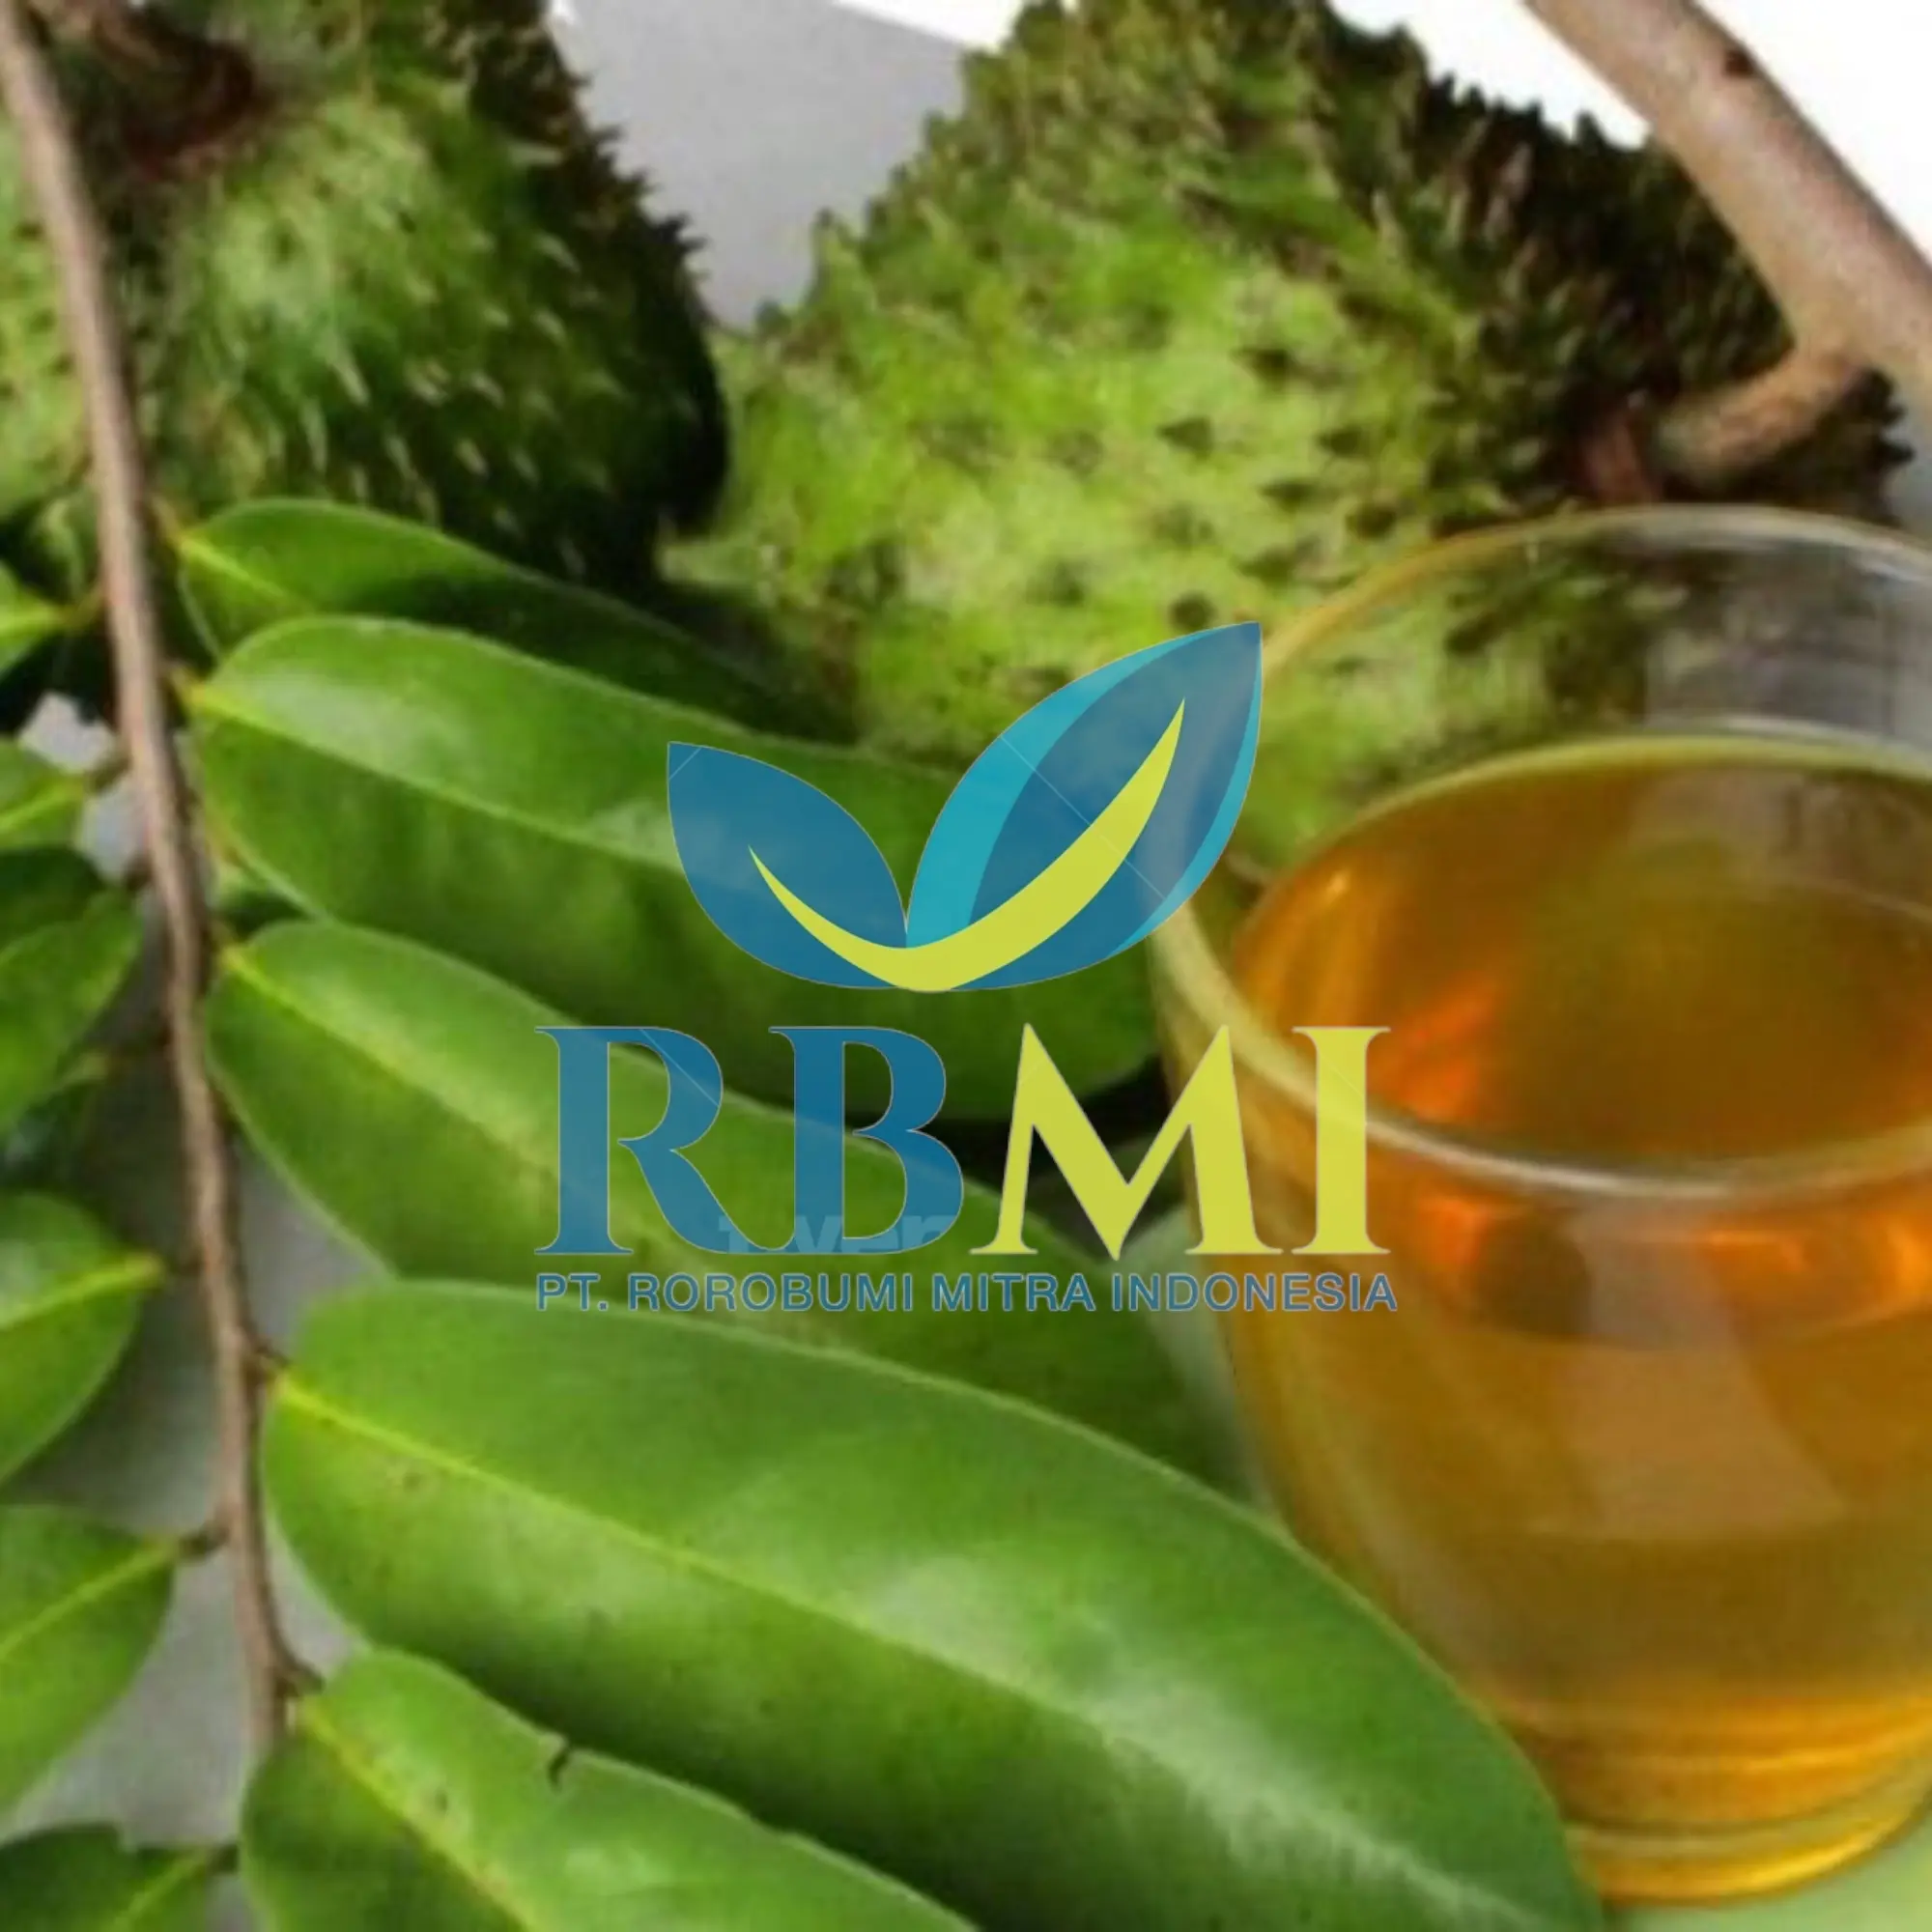 Supplier soursop leaves Graviola Leaf FROM Indonesia WITH PREMIUM QUALITY AND COMPETITIVE PRICE